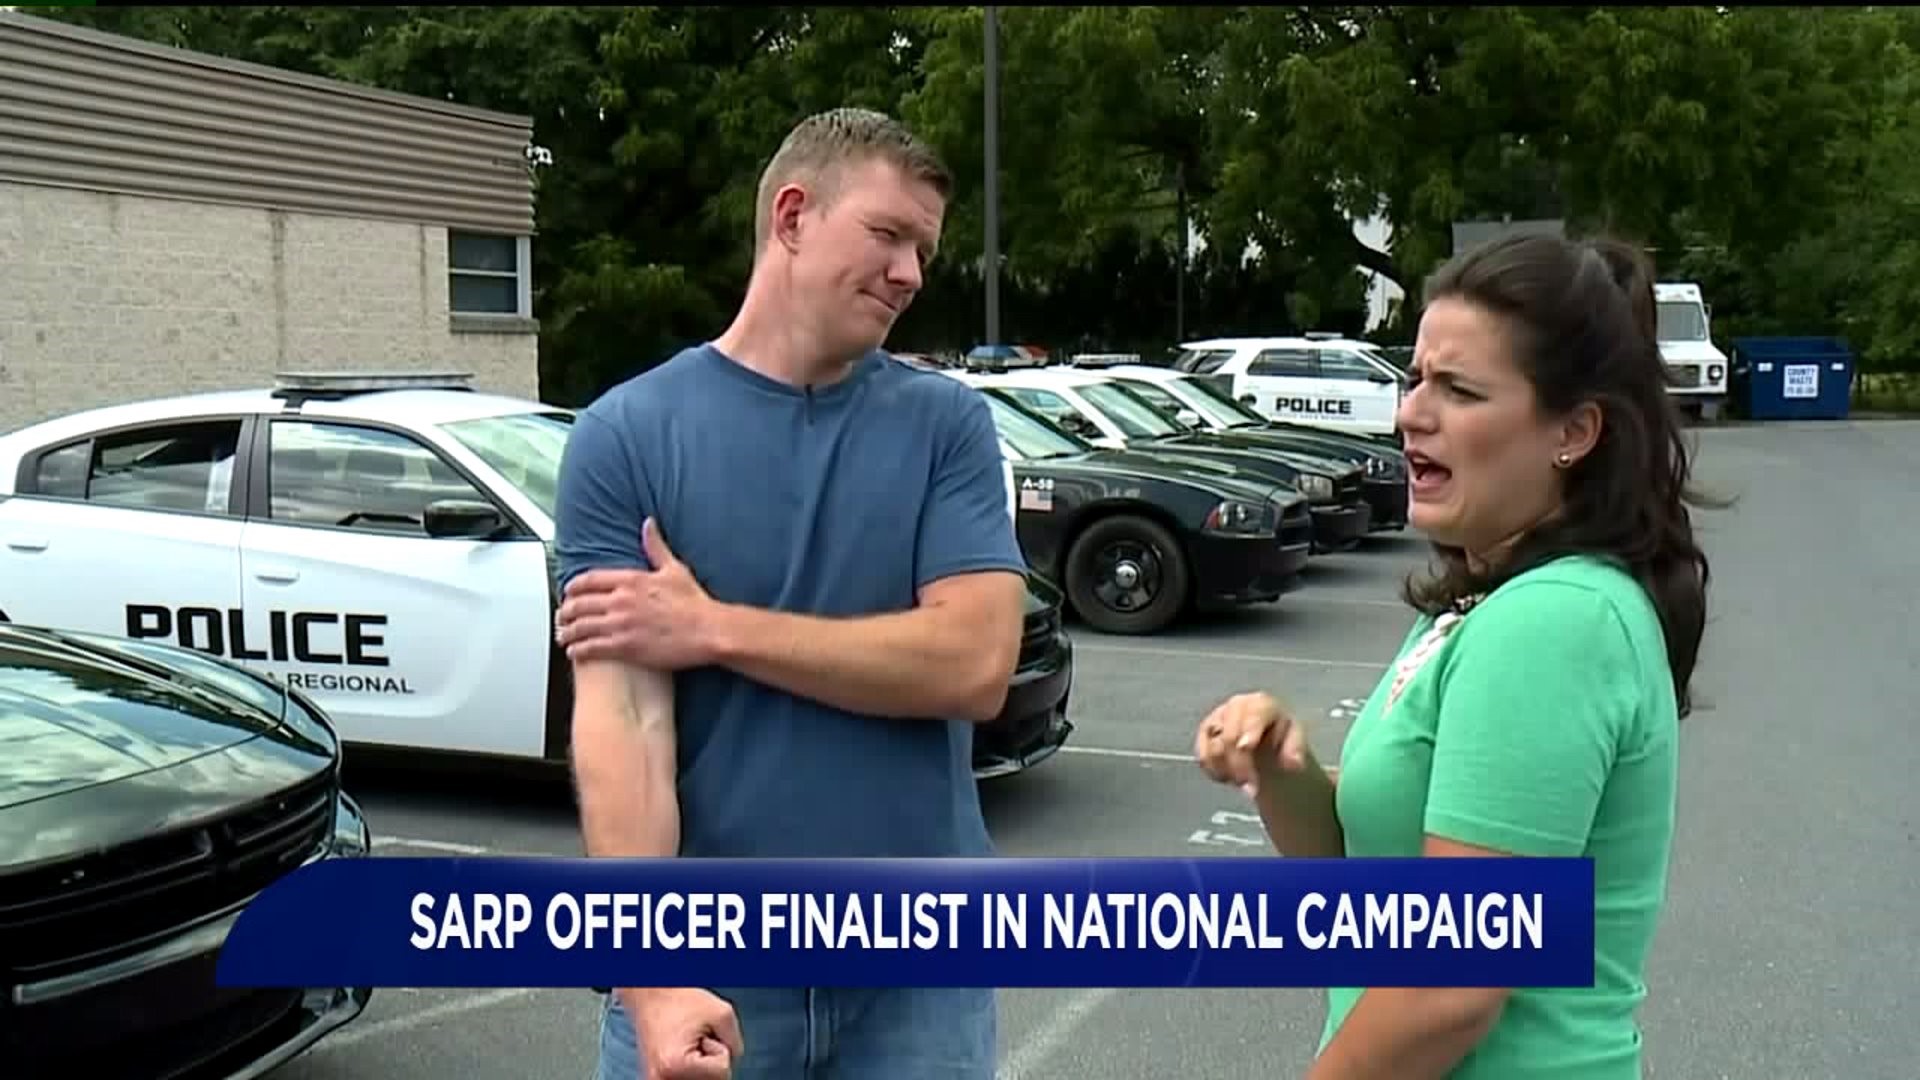 SARP Officer Finalist in National Campaign